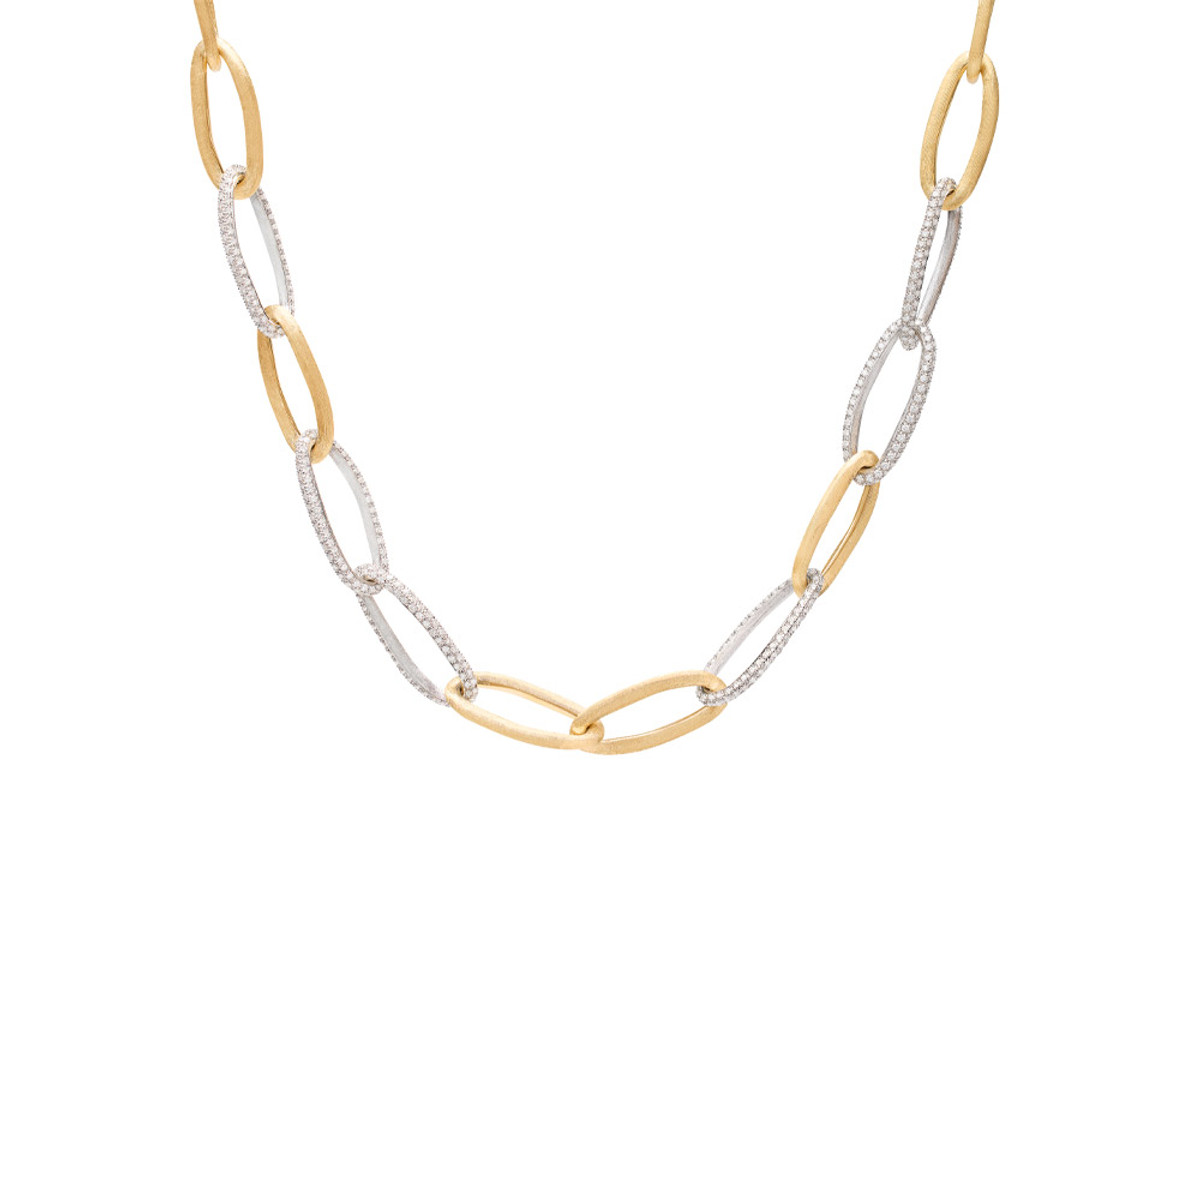 Marco Bicego Alta Collection 18K Yellow Gold Diamond Link Necklace-54238